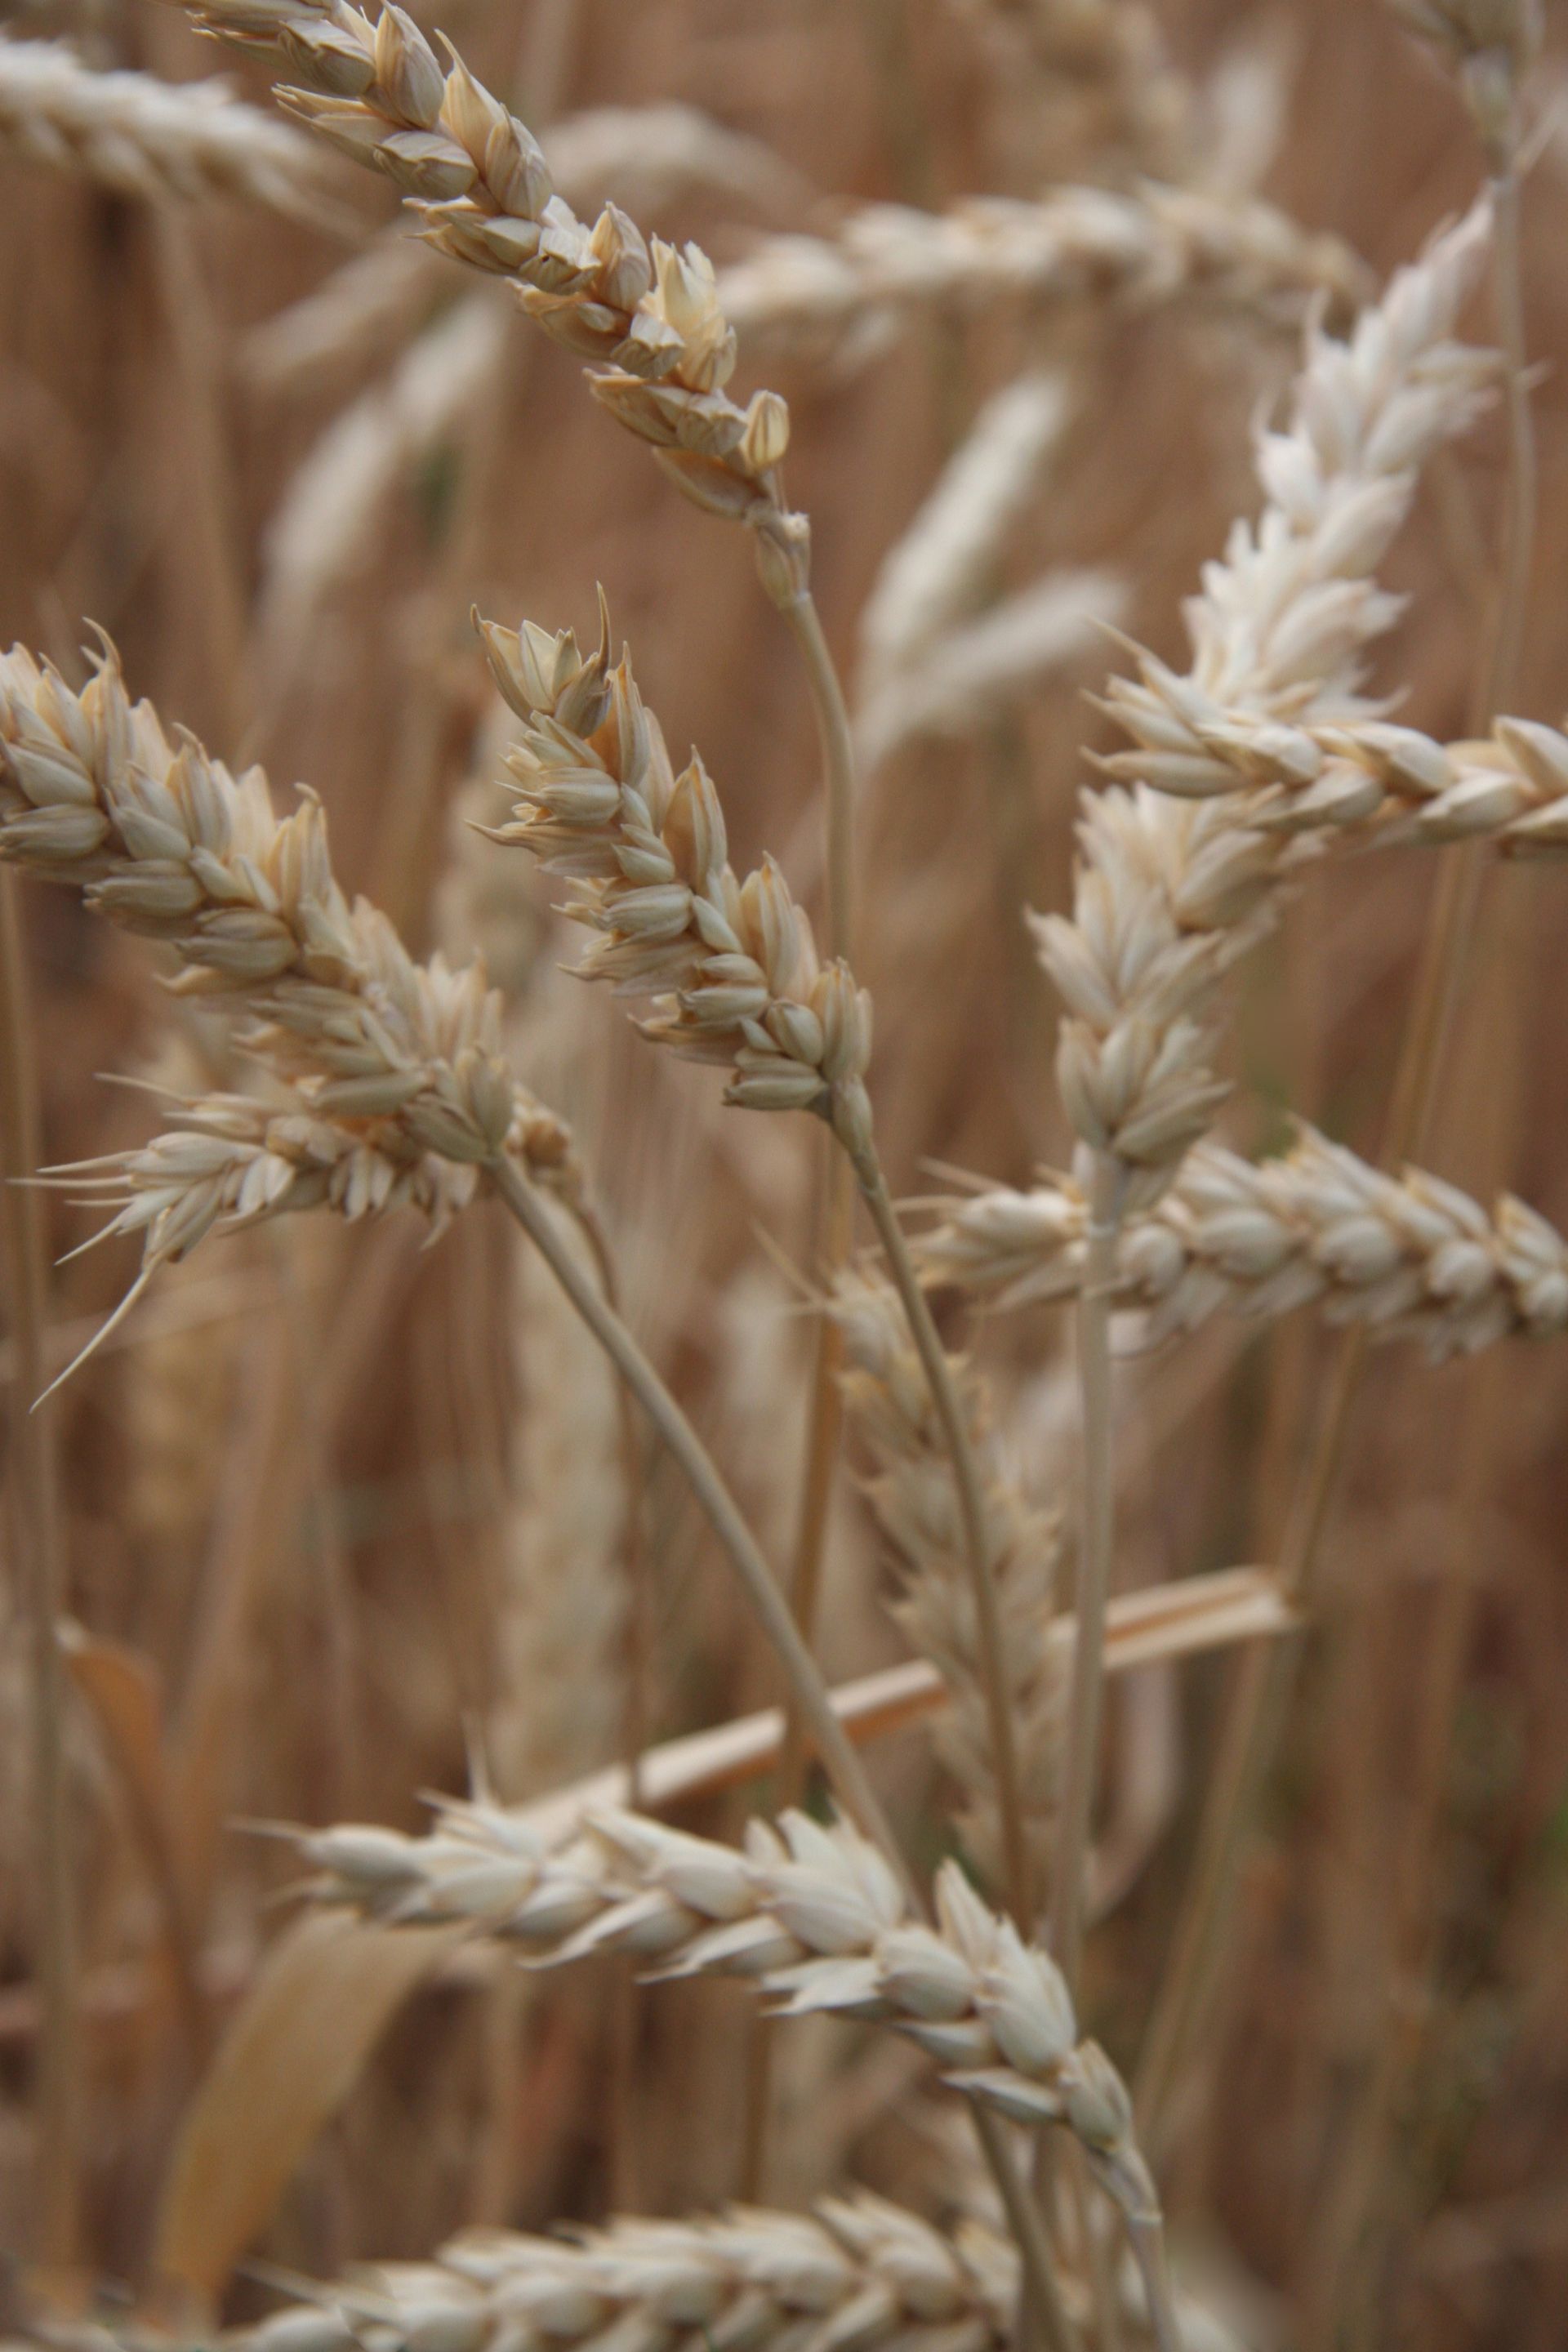 A close-up of wheat growing in a field.